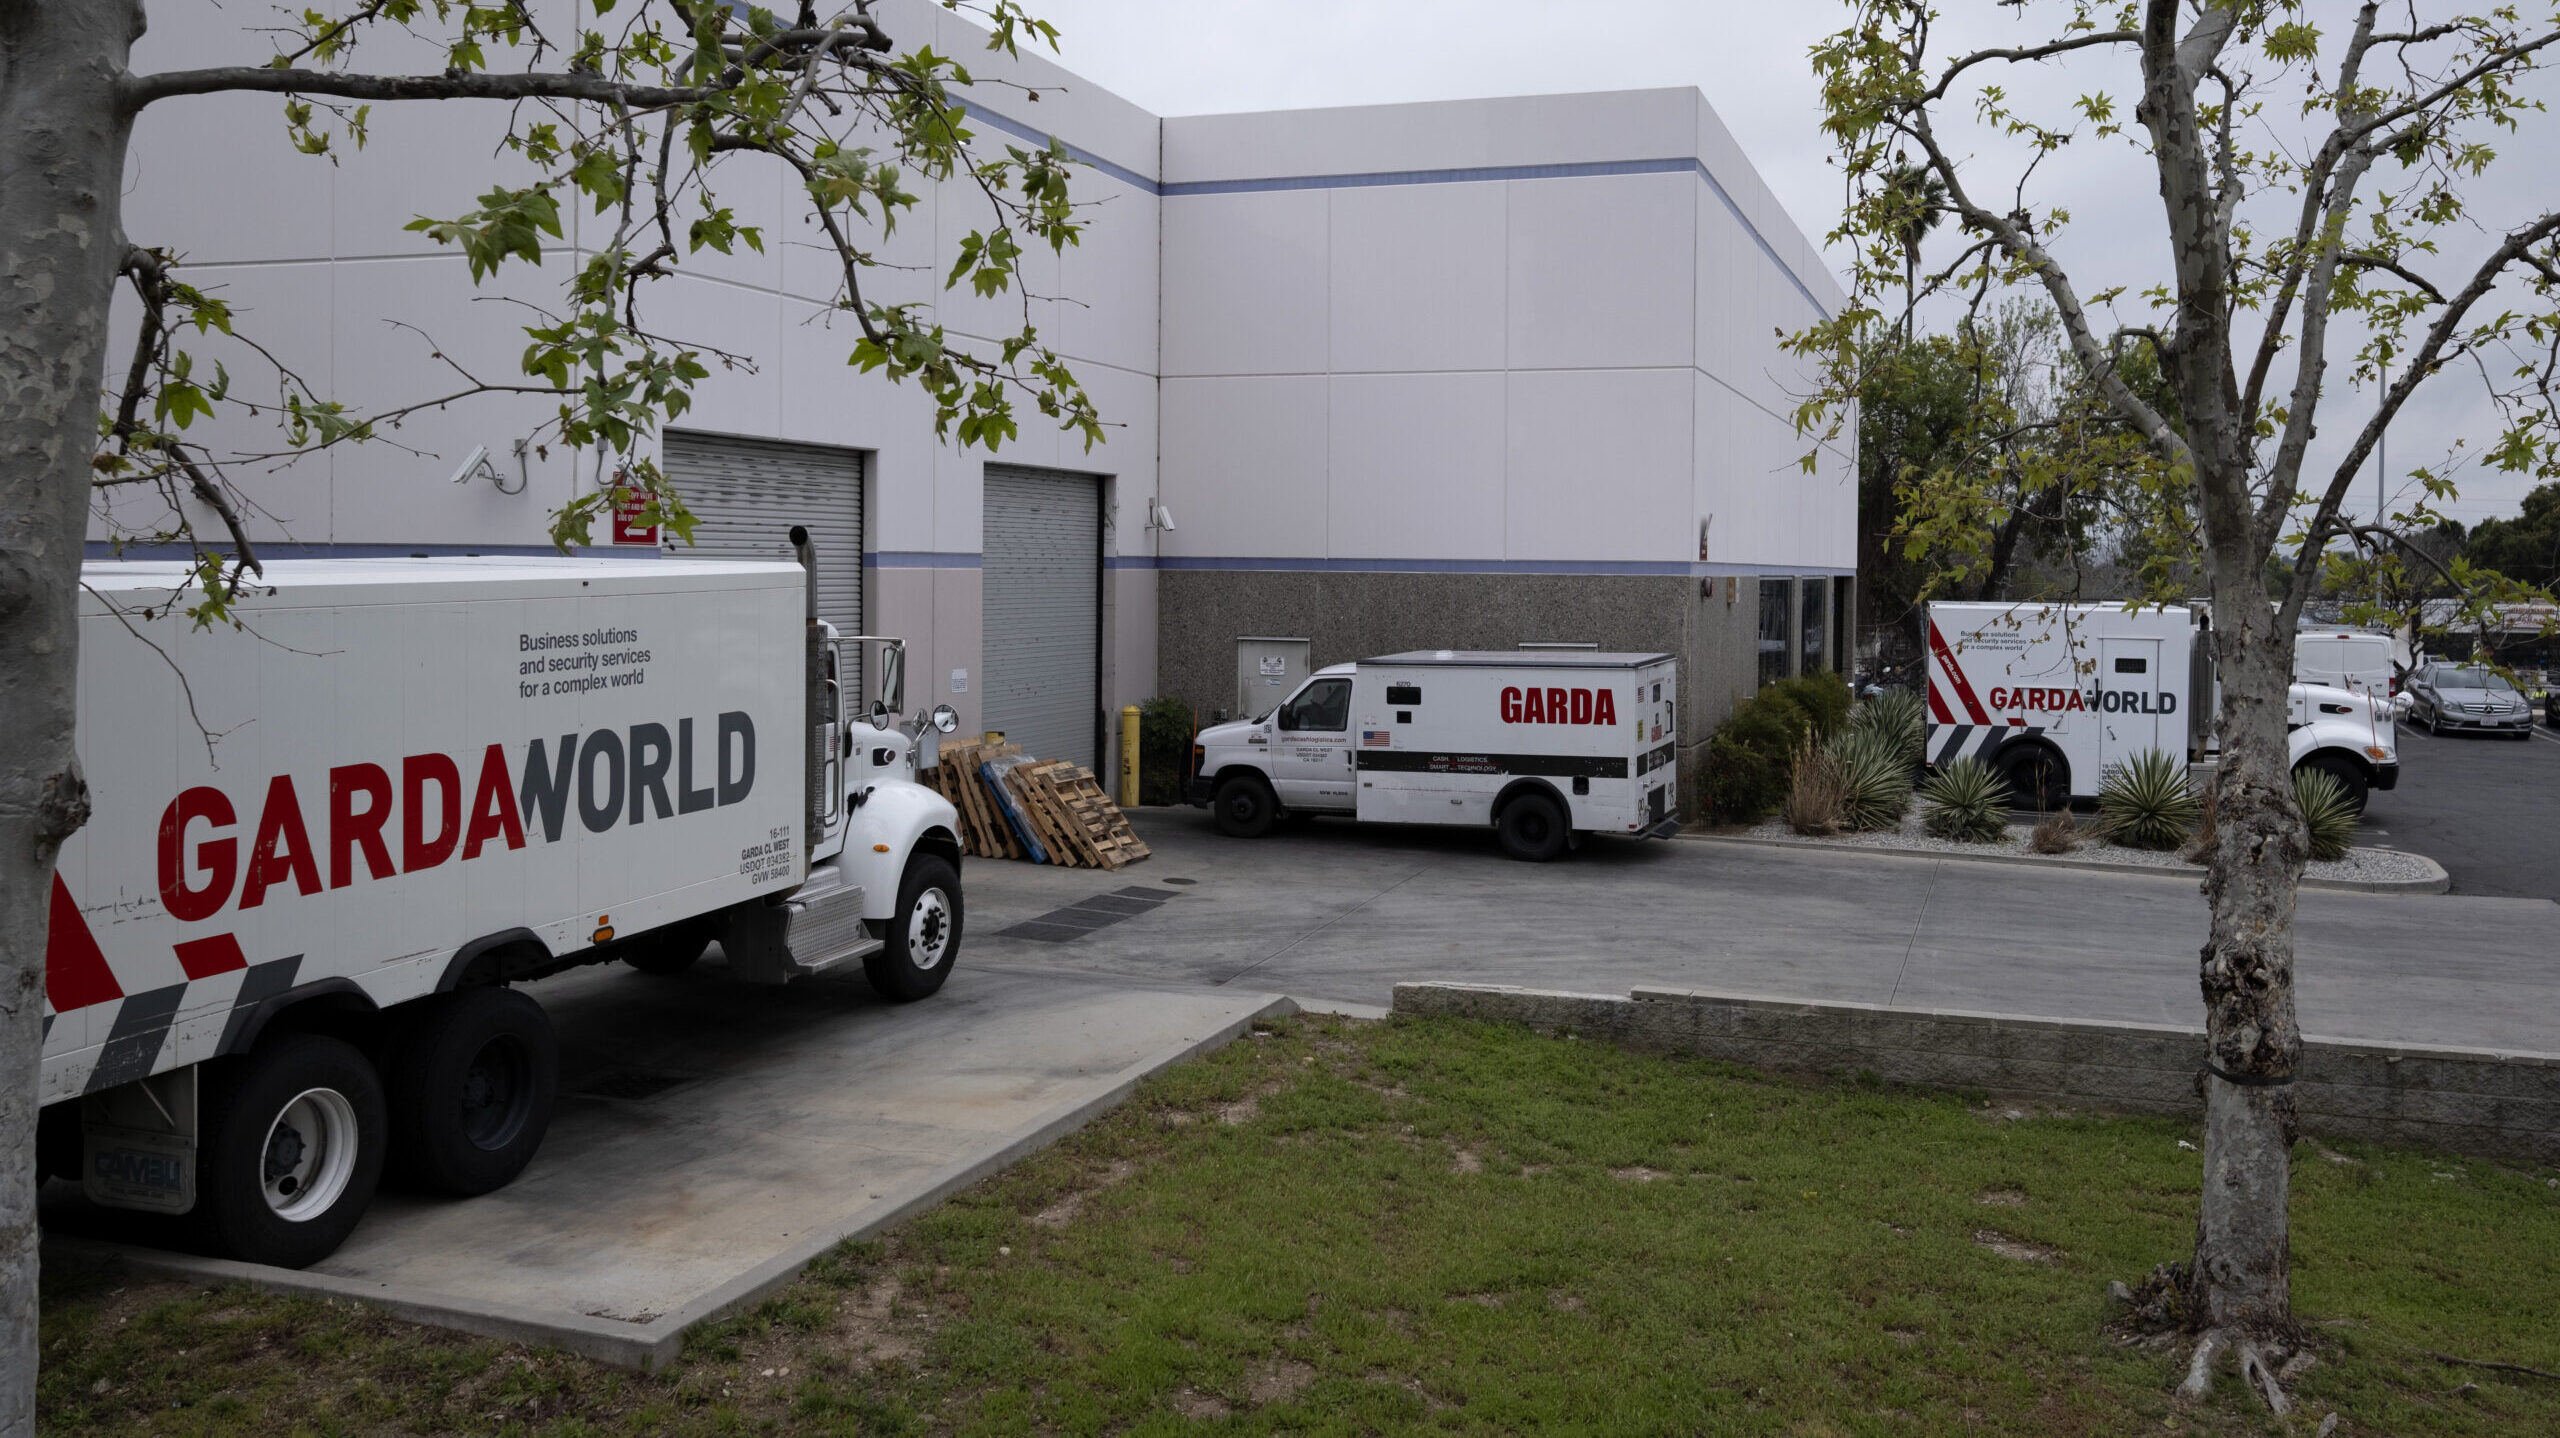 Armored trucks are parked outside the GardaWorld facility in the Sylmar section of Los Angeles on T...